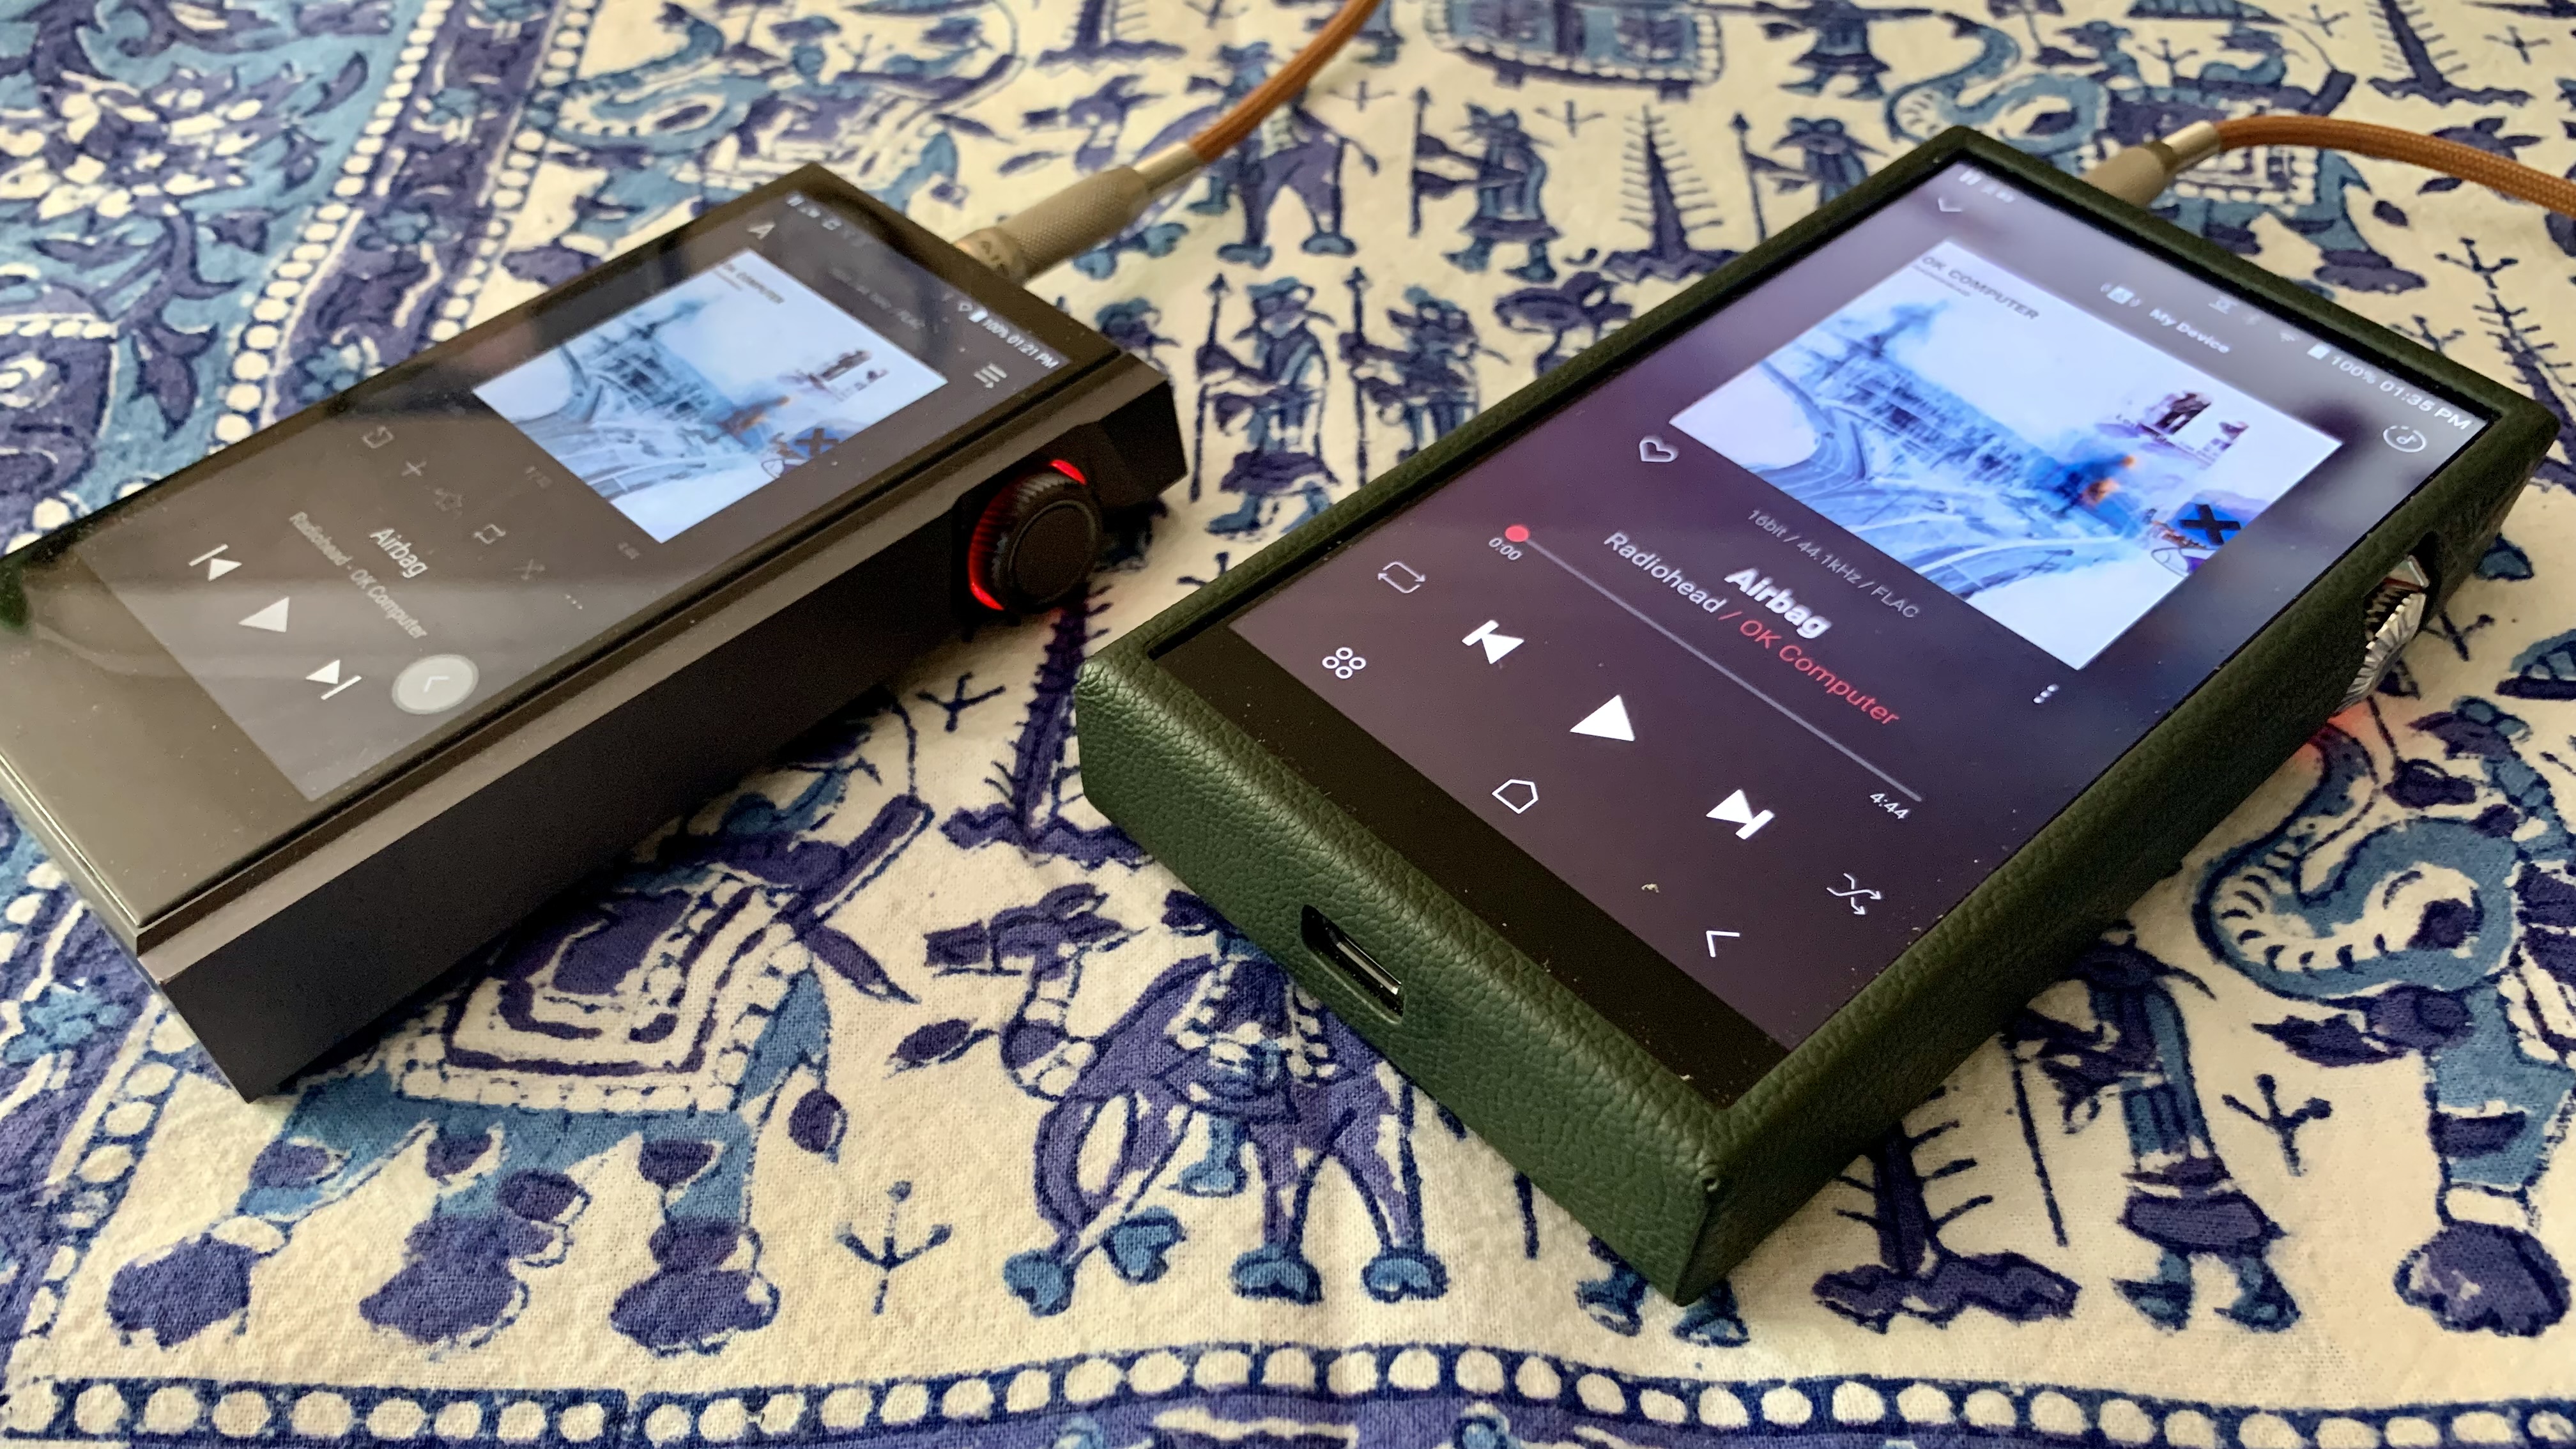 Astell & Kern A&ultima SP3000 and Astell & Kern Kann Max side by side, honing in on the volume dials, on a blue and white tablecloth